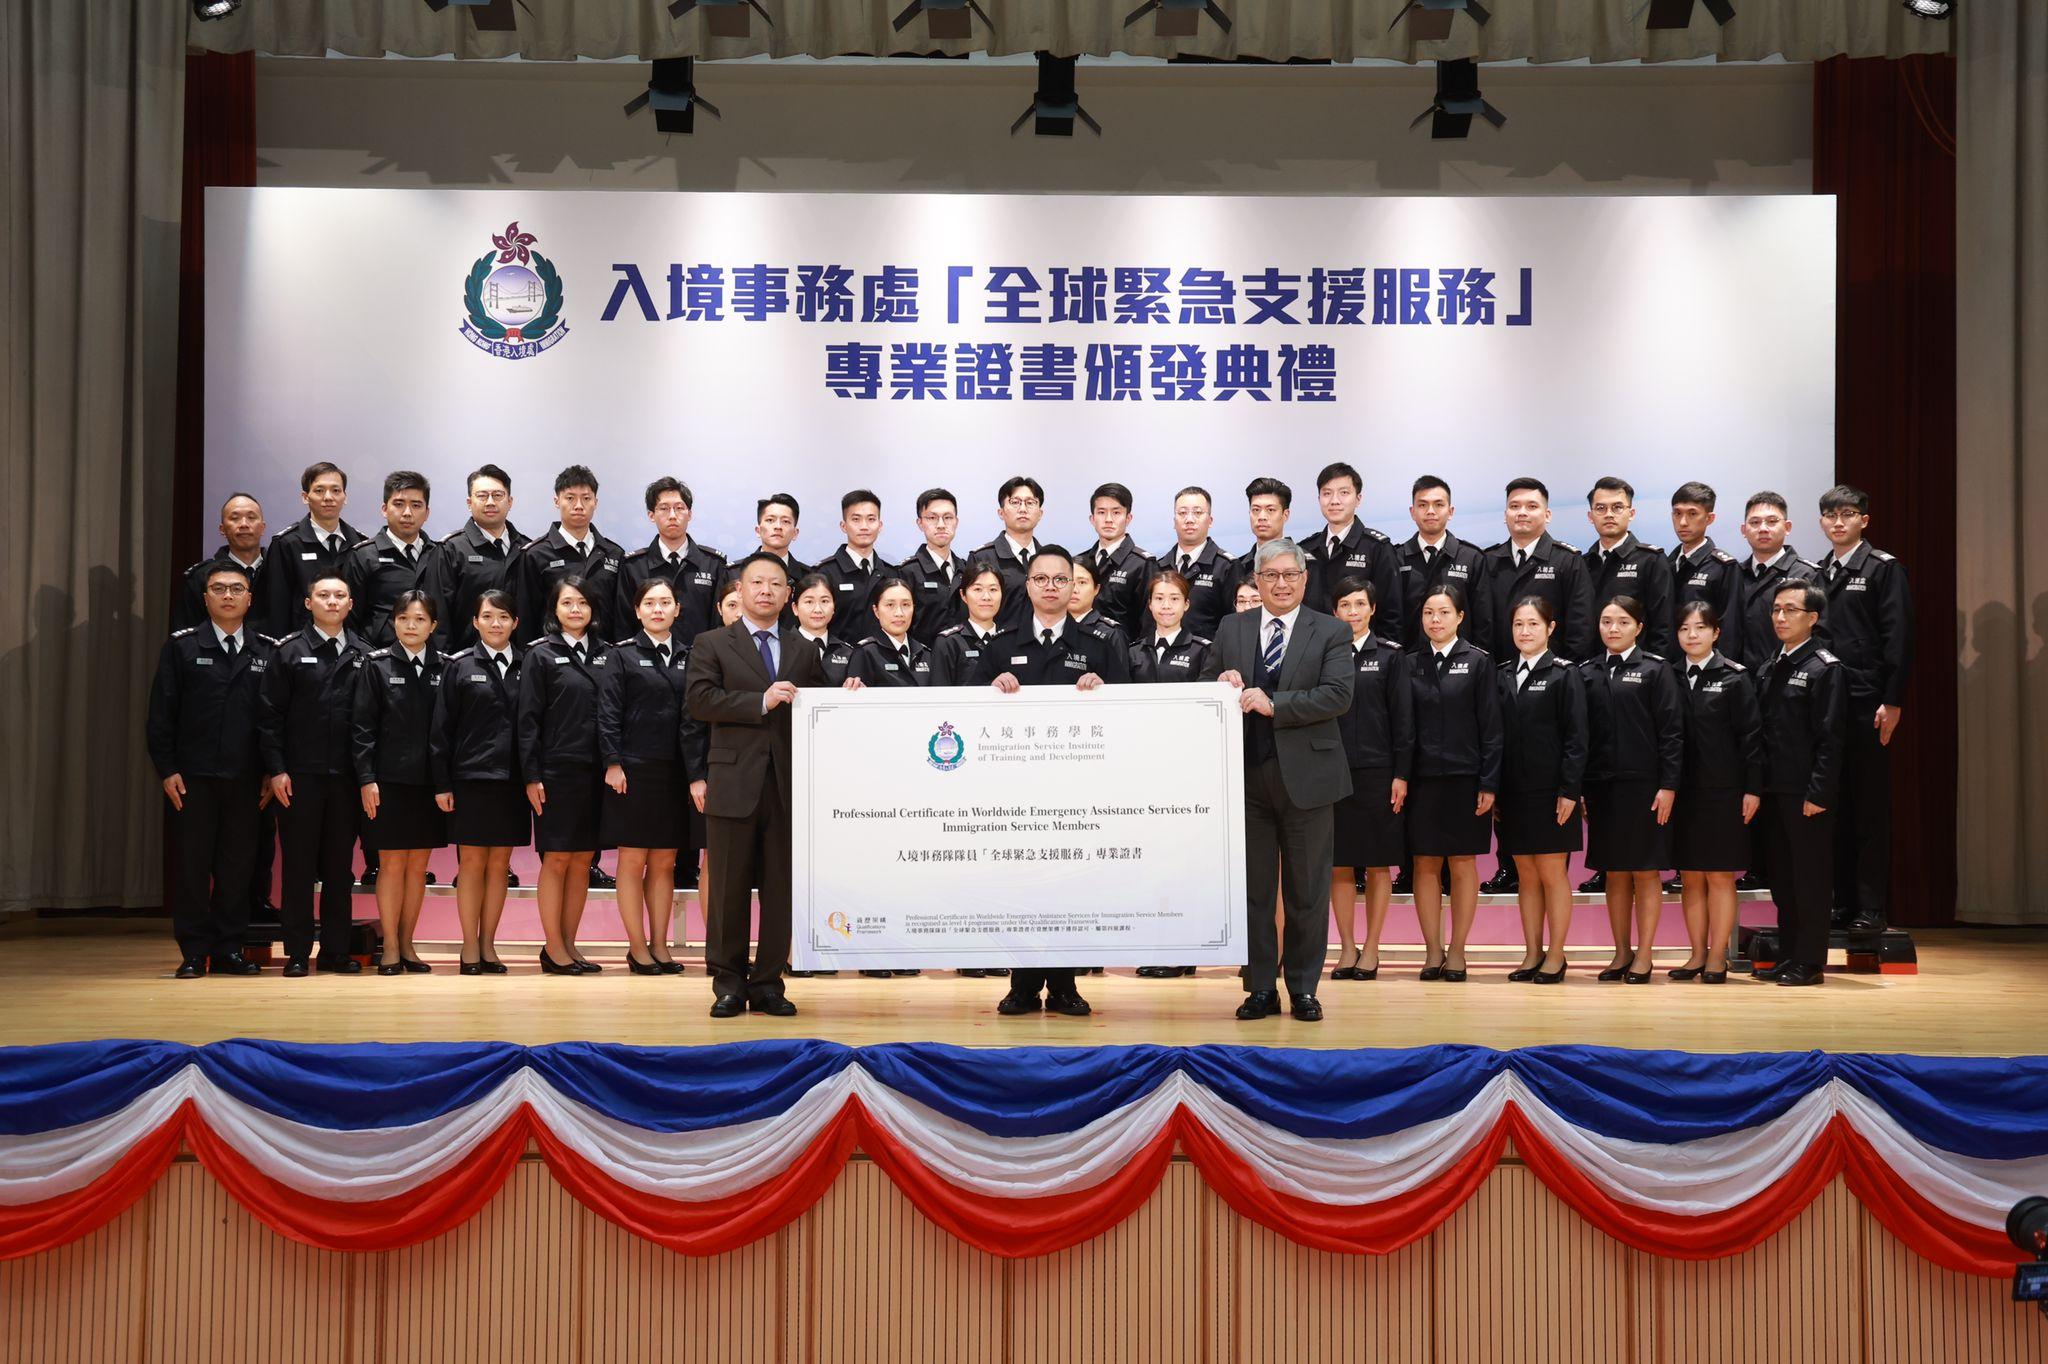 The Director of Immigration, Mr Au Ka-wang (front row, right), and the Deputy Director-General of the Consular Department, Office of the Commissioner of the Ministry of Foreign Affairs in the Hong Kong Special Administrative Region, Mr Zheng Jie (front row, left), present certificates to graduates at the certificate presentation ceremony of "Professional Certificate in Worldwide Emergency Assistance Services for Immigration Service Members" today (March 28).